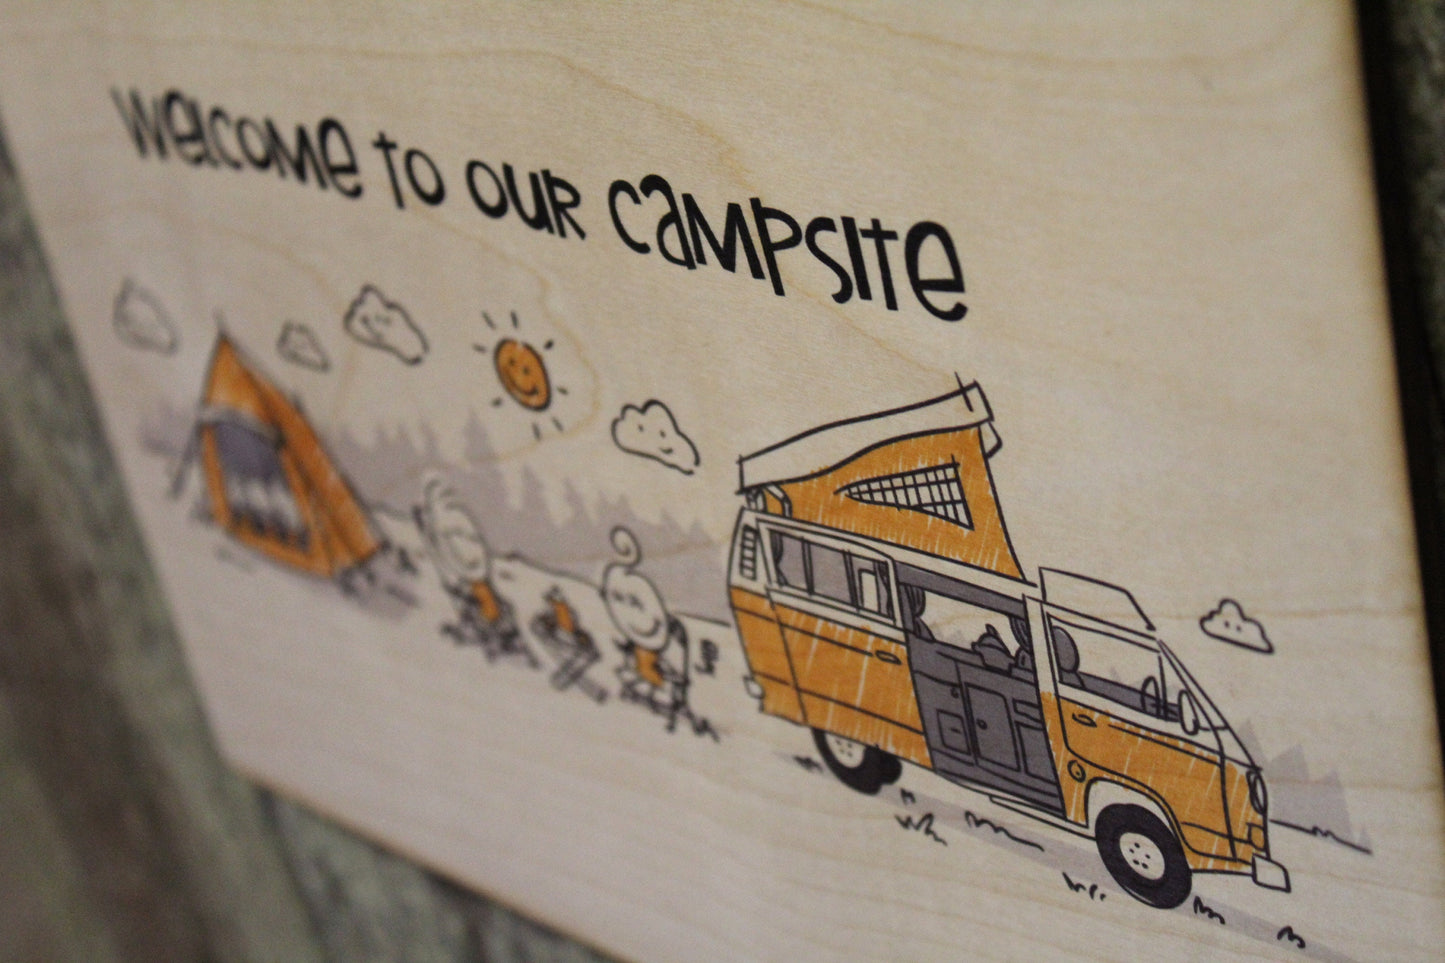 Campsite Welcome Sign Camping Text Camper Rv Family Outdoors Rustic Wooden Wall Decor Wood Print